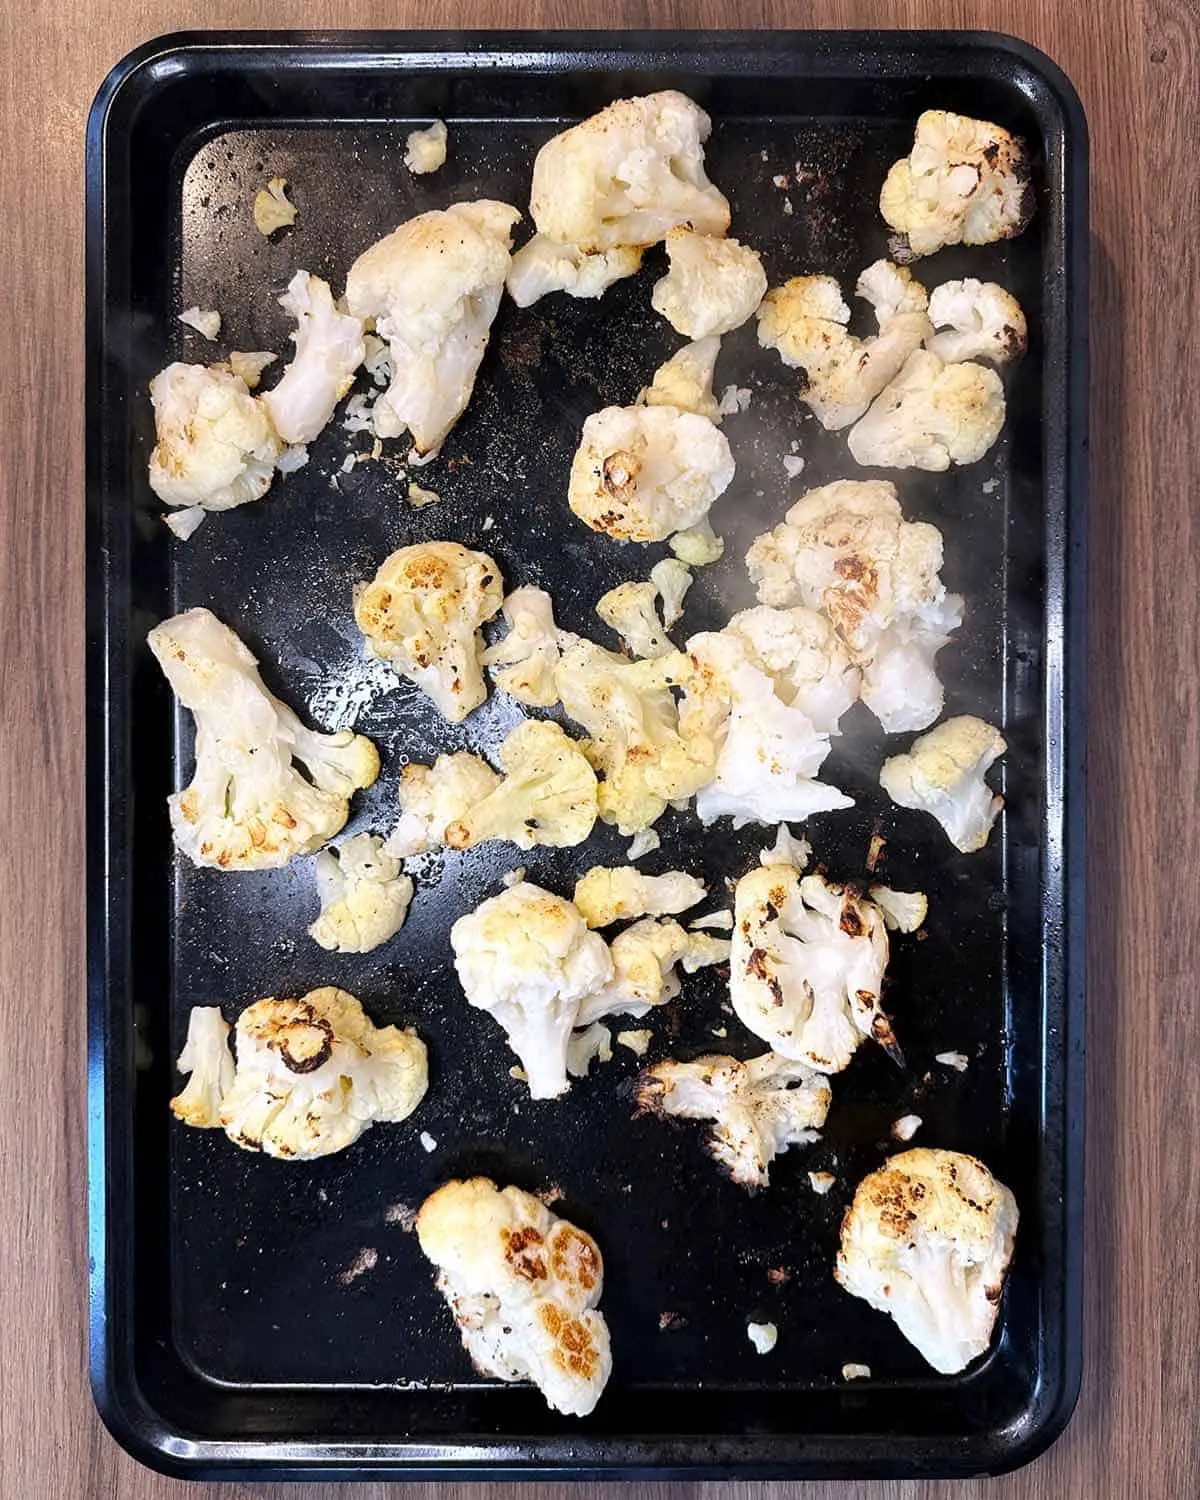 Oil and seasoning added to the cauliflower florets.